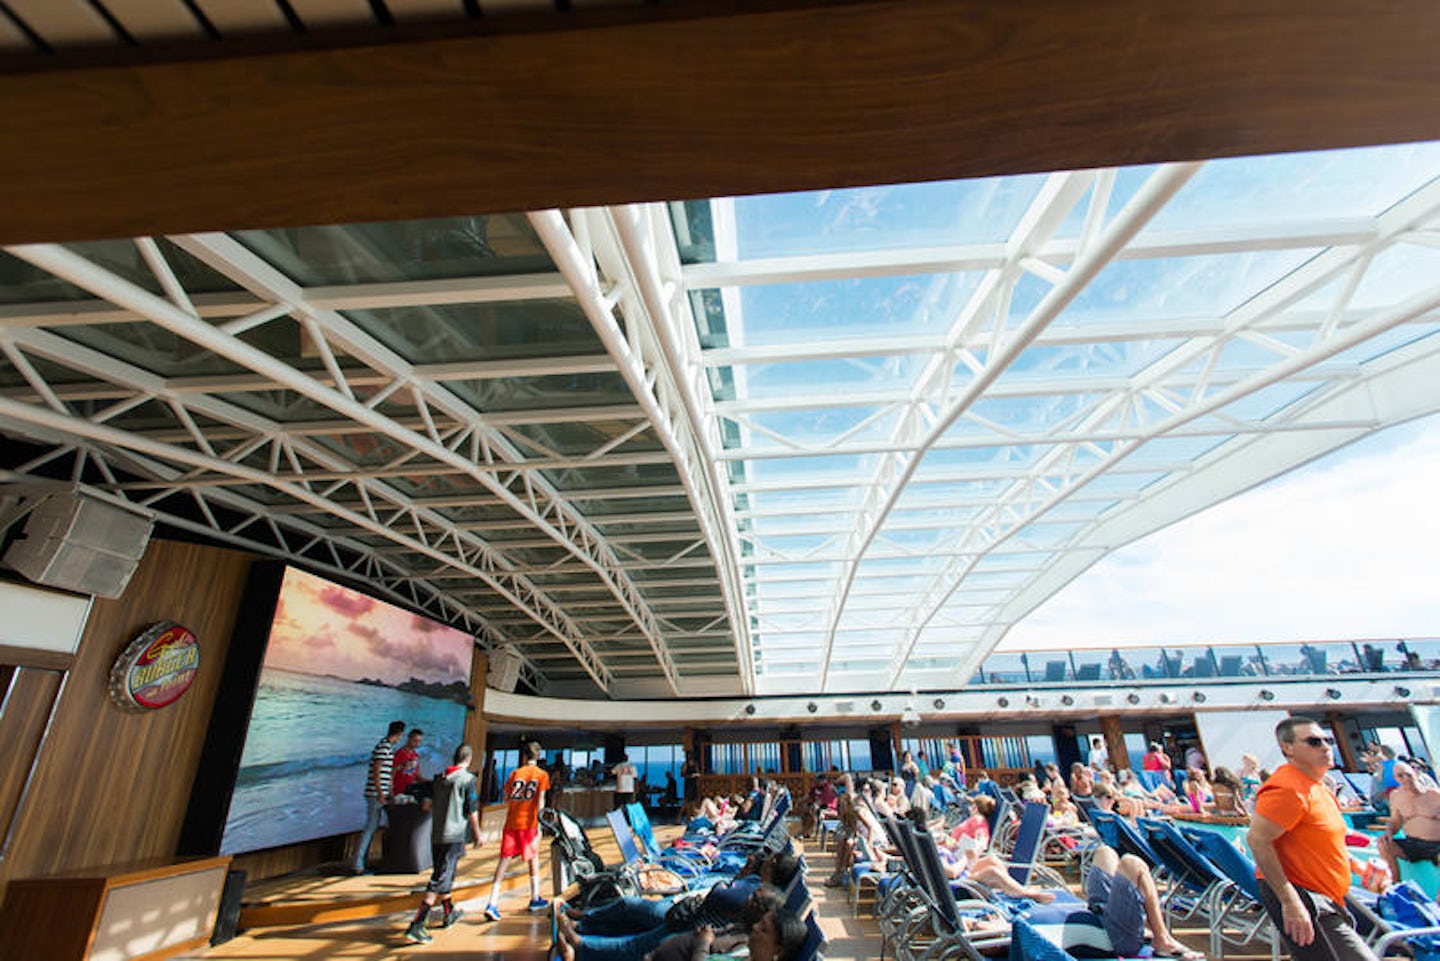 Retractable Roof on Carnival Pride